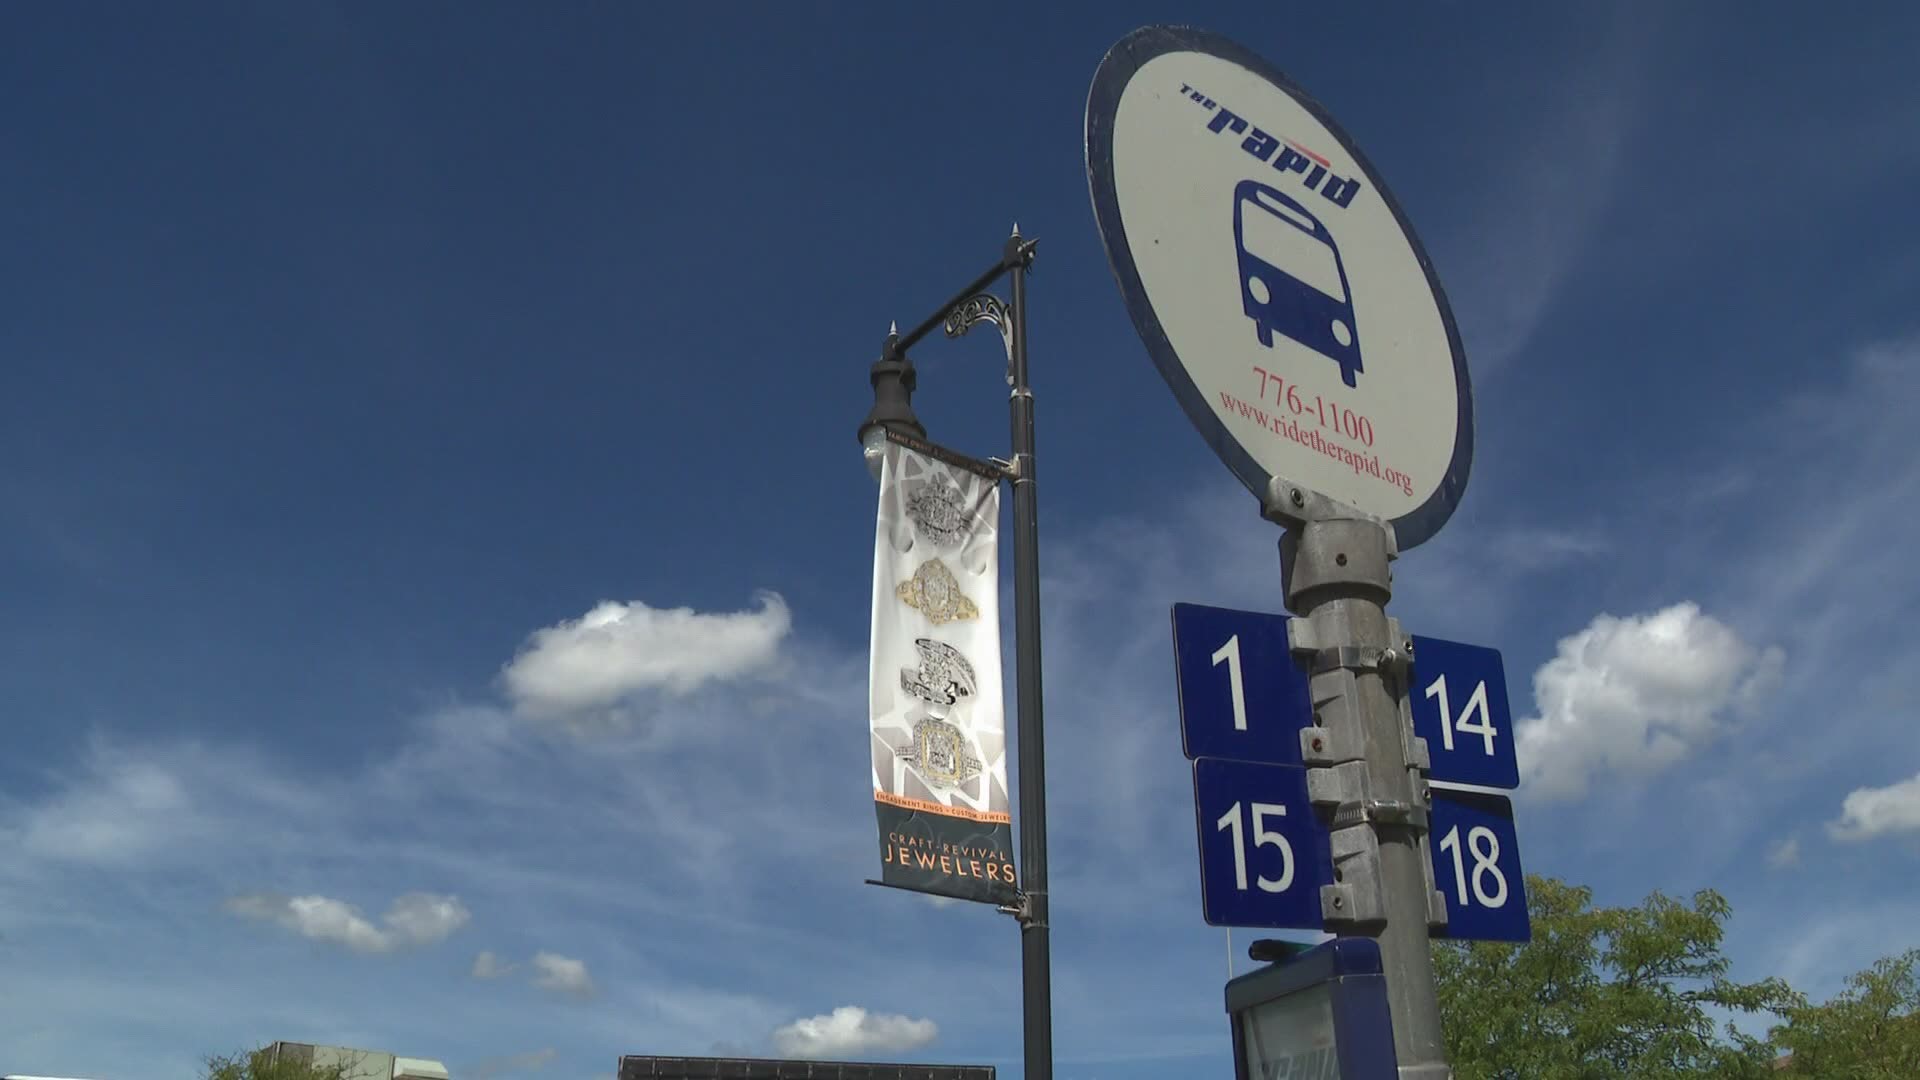 Between March and August, Grand Rapids saw a 158-percent jump in mass transit usage. That's the sixth largest increase in the country.